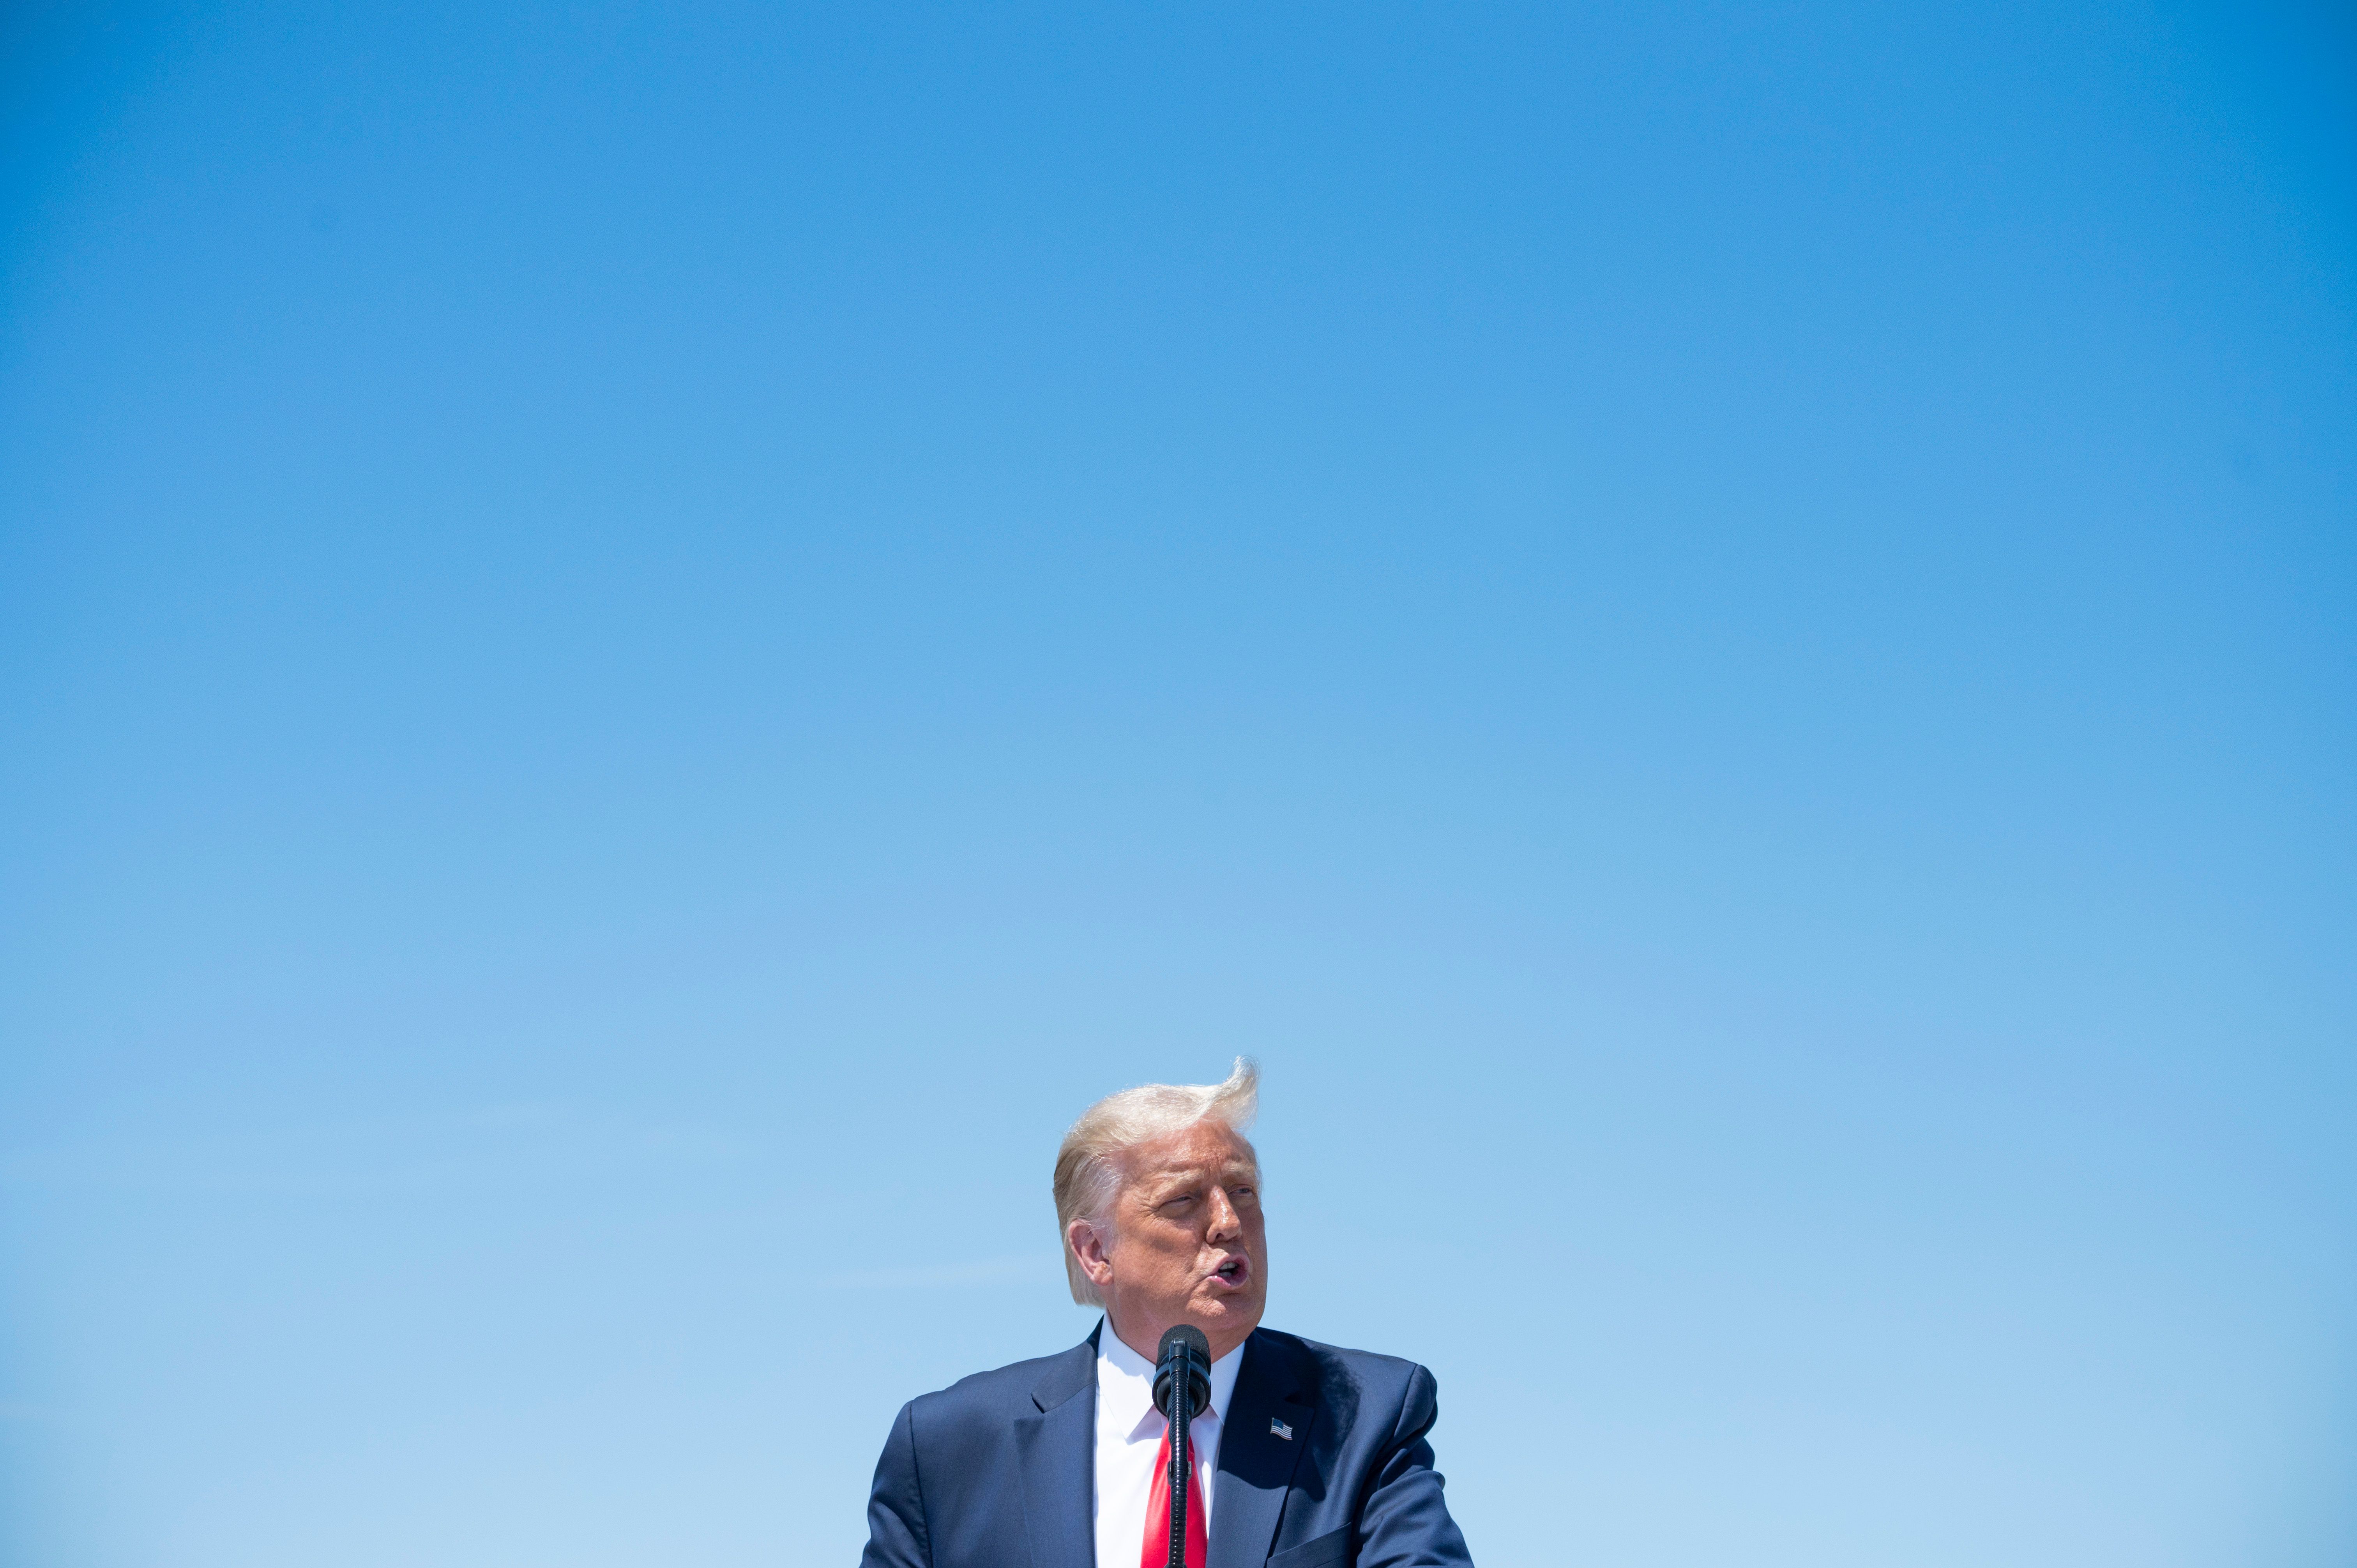 US President Donald Trump speaks on economic prosperity, at Burke Lakefront Airport in Cleveland, Ohio, on August 6, 2020. (Photo by JIM WATSON/AFP via Getty Images)